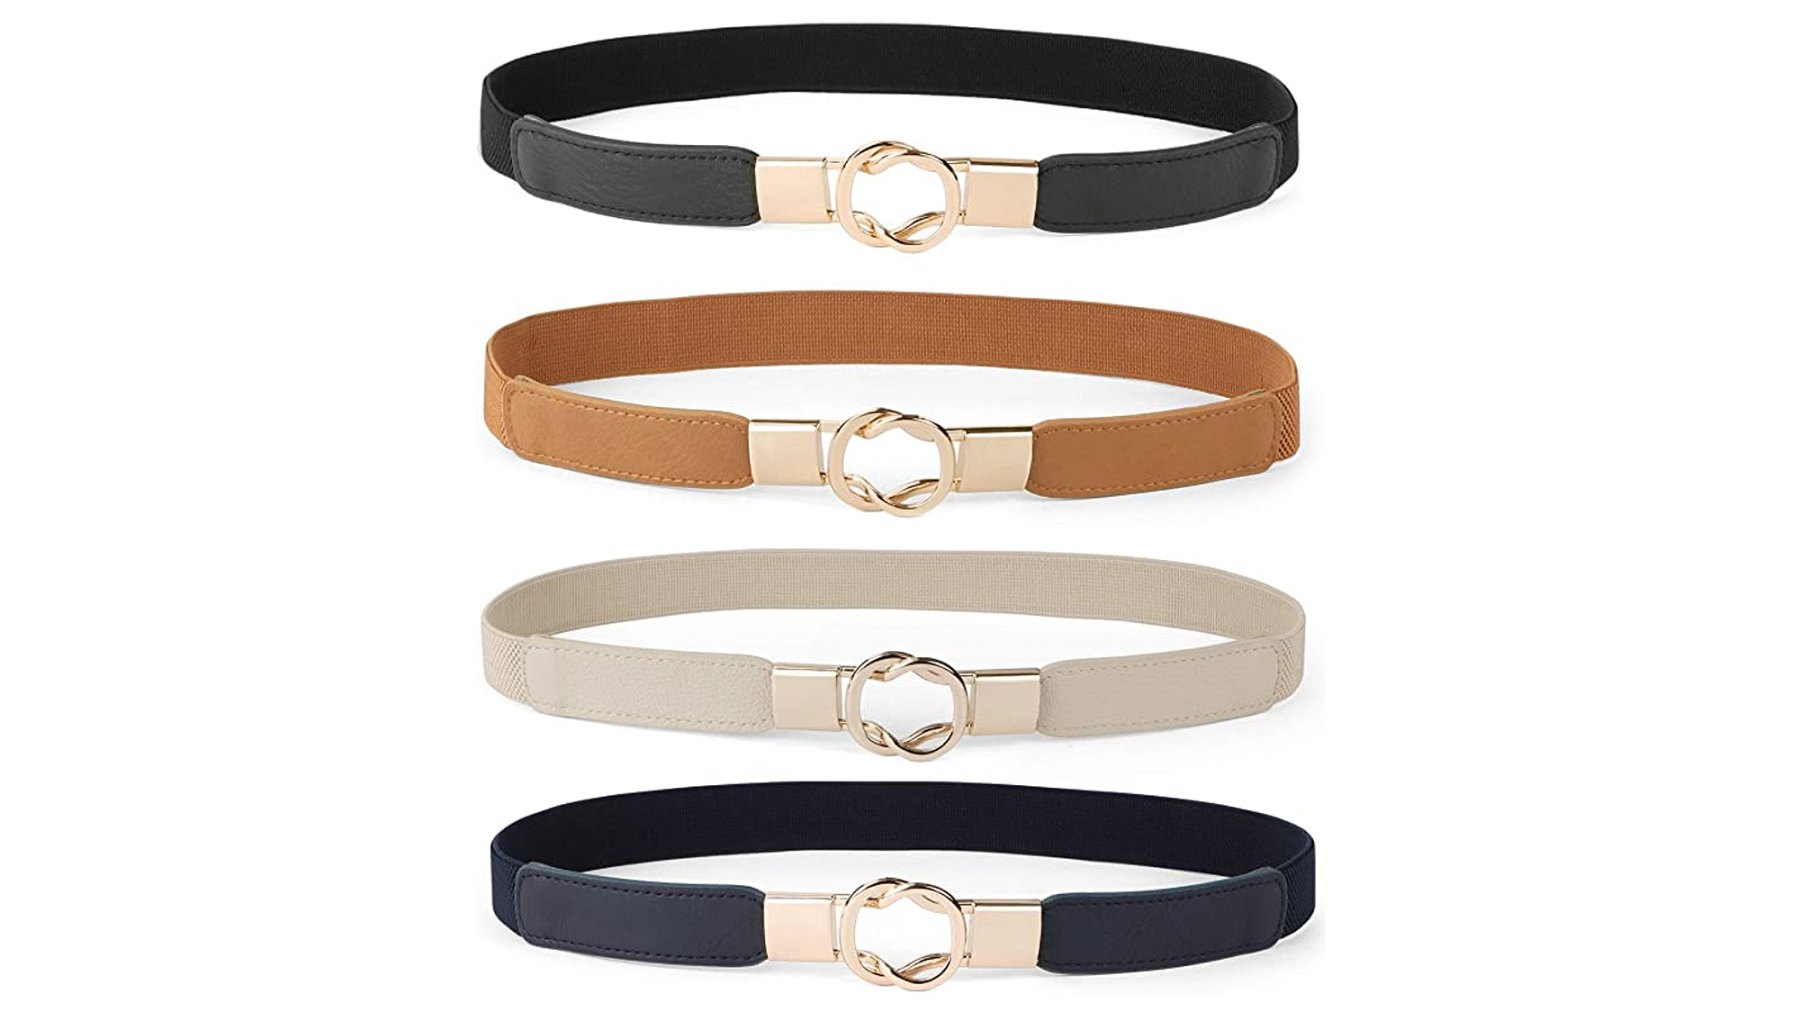 Werforu $8 Belt Can Make Any Old Outfit Look Brand New Again | Us Weekly